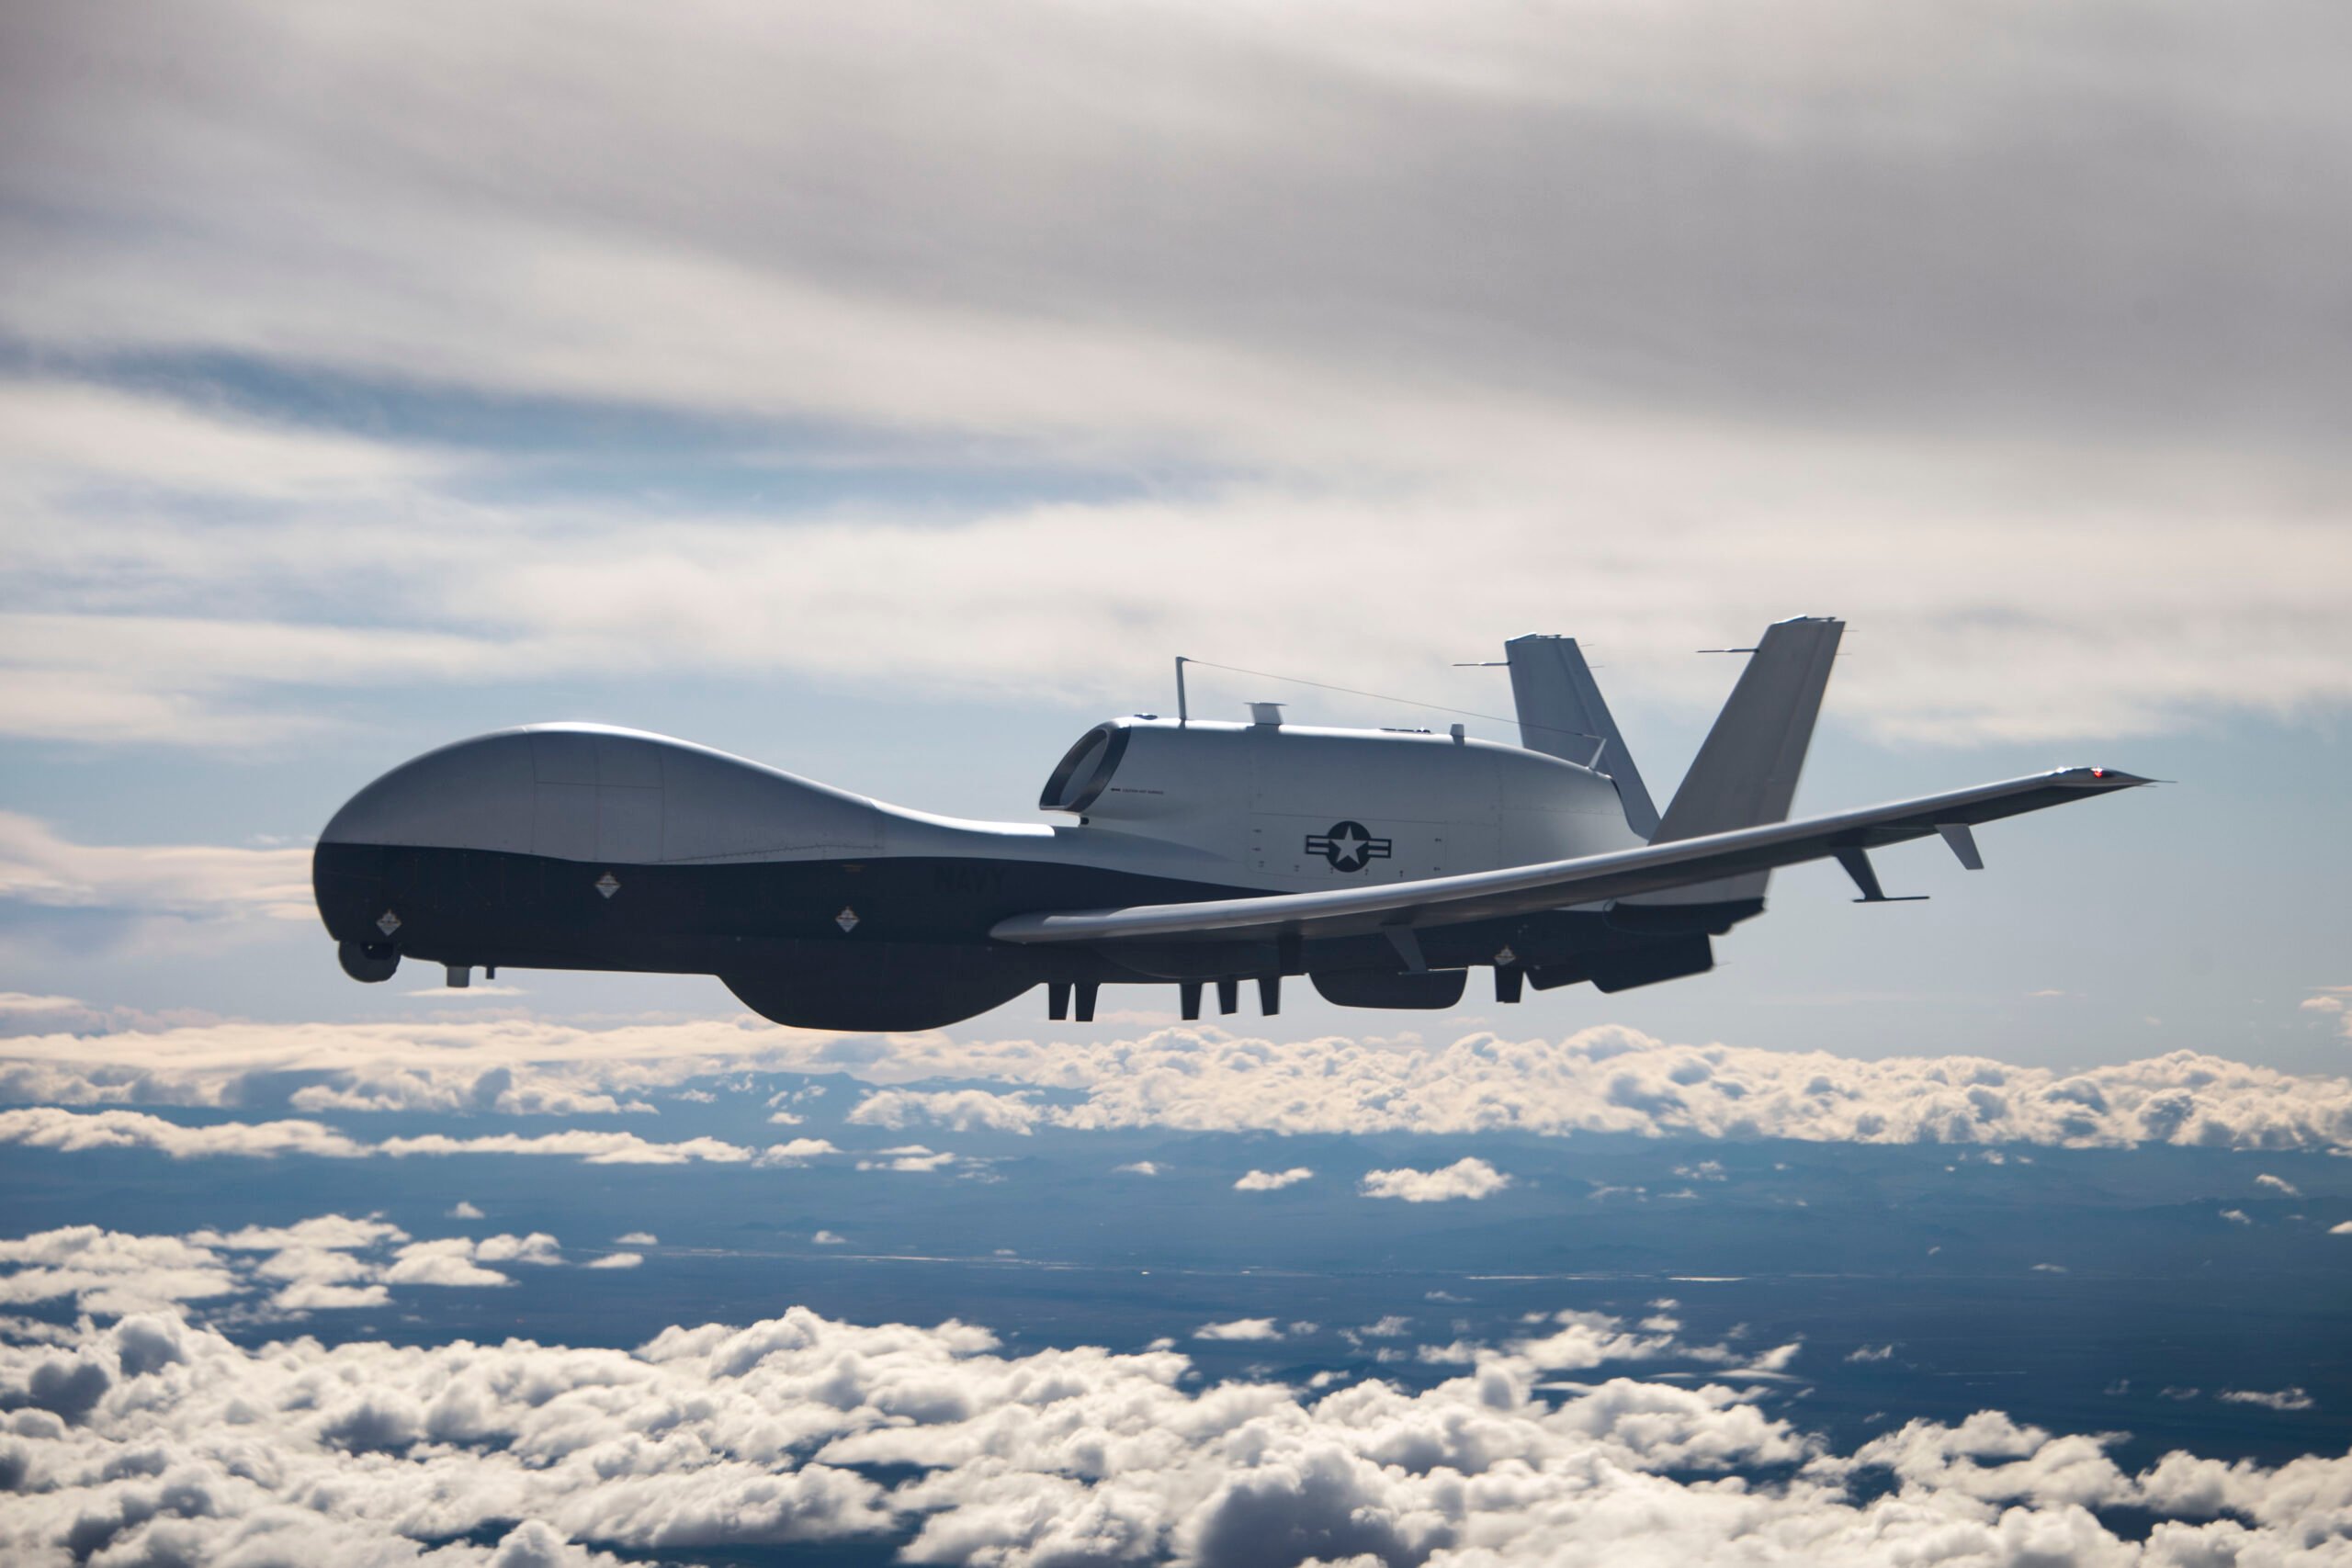 Northrop Grumman delivers the fourth MQ-4C Triton for long-range, persistent, maritime surveillance to the U.S. Navy for Initial Operational Capability.